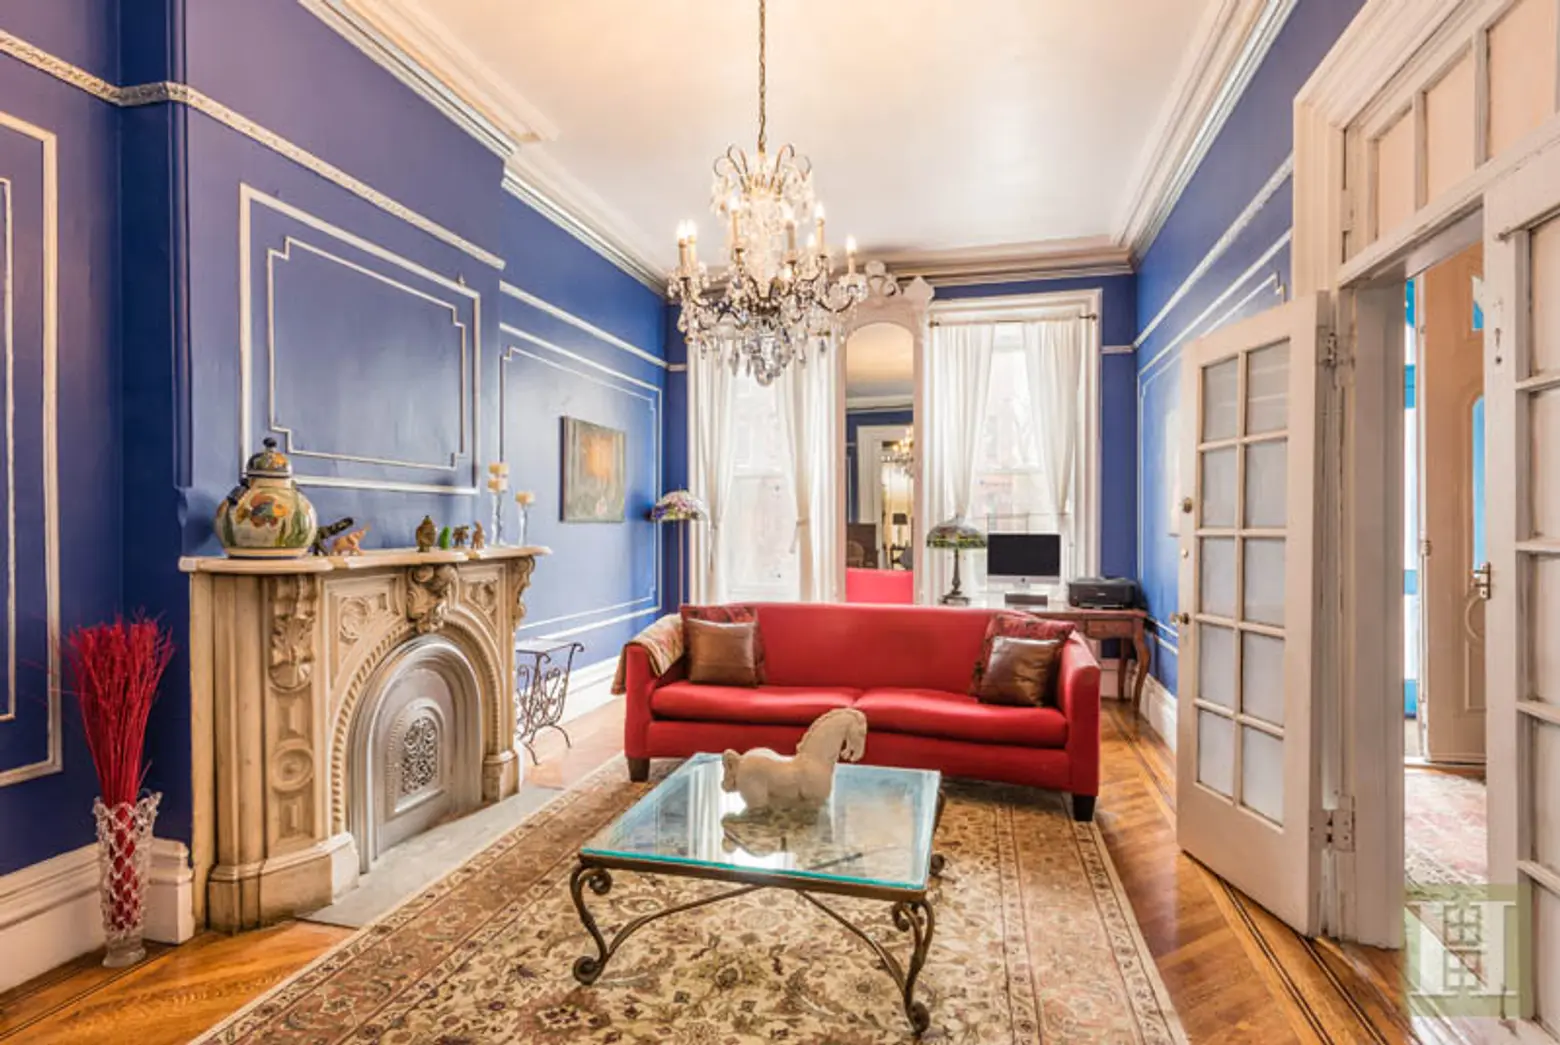 This Historic $2.1 Million Bed-Stuy Townhouse Comes with a Koi Pond